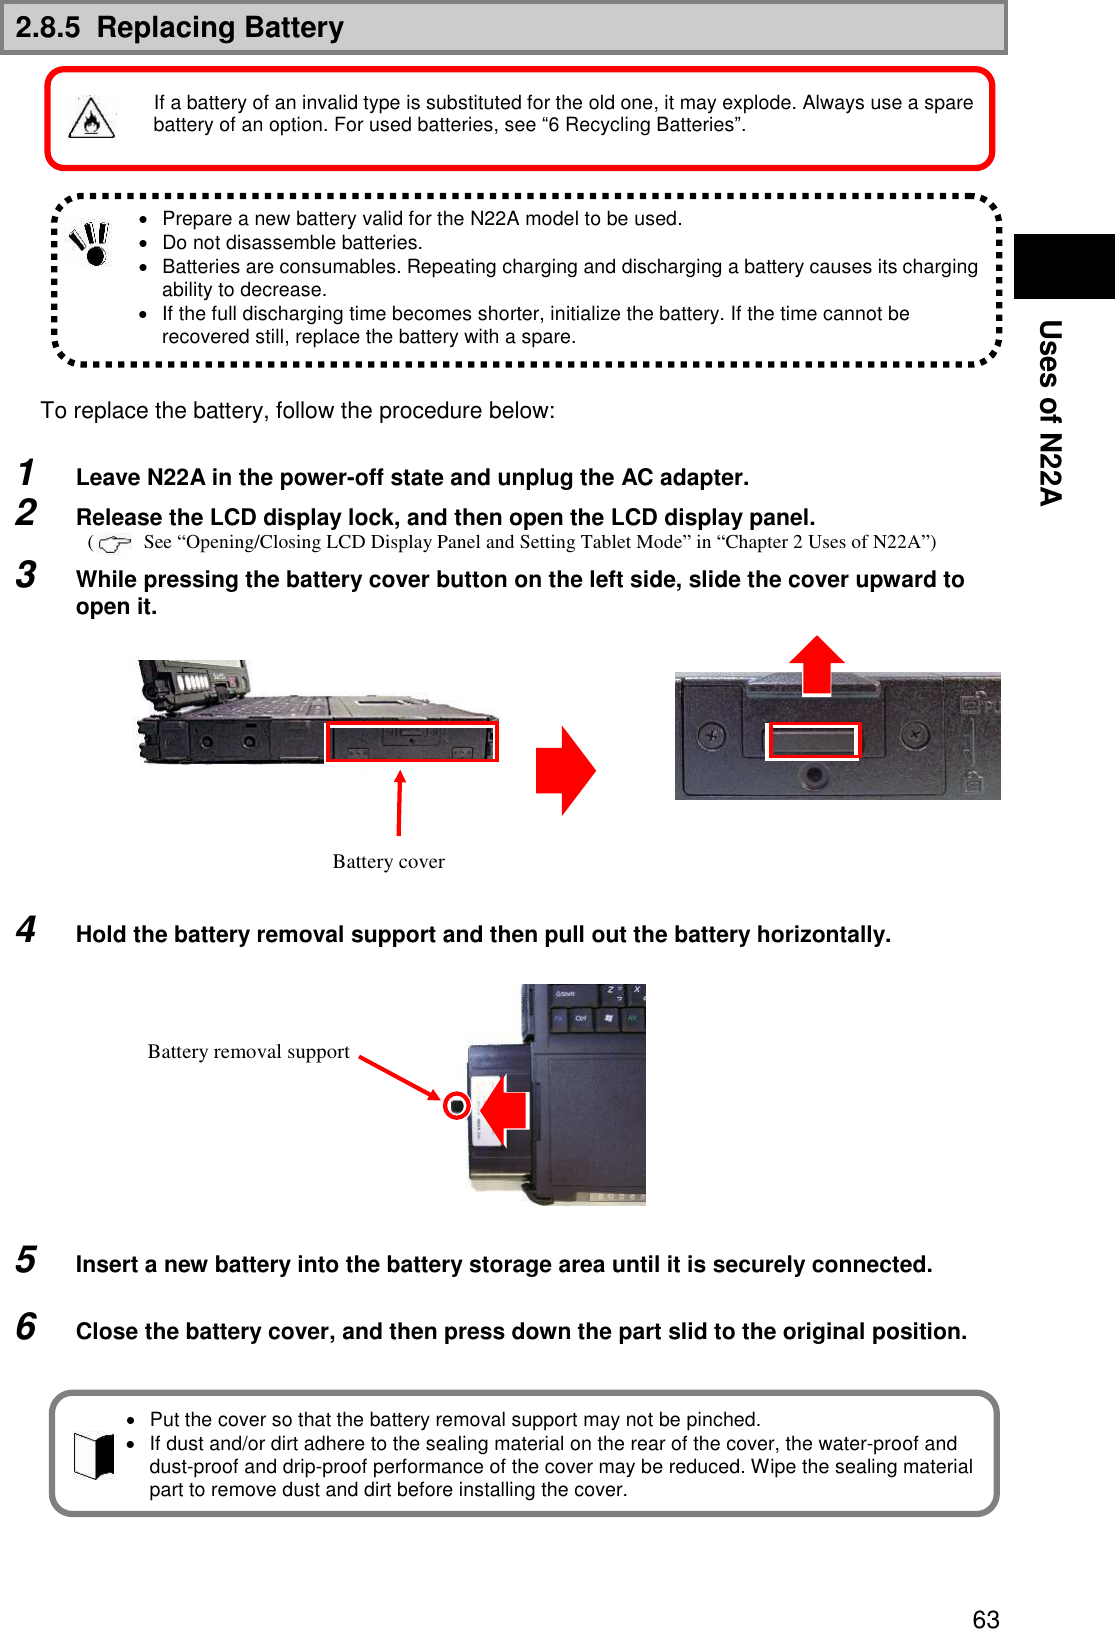  63 Uses of N22A 2.8.5  Replacing Battery              To replace the battery, follow the procedure below:  1  Leave N22A in the power-off state and unplug the AC adapter. 2  Release the LCD display lock, and then open the LCD display panel. (     See “Opening/Closing LCD Display Panel and Setting Tablet Mode” in “Chapter 2 Uses of N22A”) 3  While pressing the battery cover button on the left side, slide the cover upward to open it.            4  Hold the battery removal support and then pull out the battery horizontally.              5  Insert a new battery into the battery storage area until it is securely connected.  6  Close the battery cover, and then press down the part slid to the original position.            Prepare a new battery valid for the N22A model to be used.   Do not disassemble batteries.   Batteries are consumables. Repeating charging and discharging a battery causes its charging ability to decrease.   If the full discharging time becomes shorter, initialize the battery. If the time cannot be recovered still, replace the battery with a spare. Battery cover   Put the cover so that the battery removal support may not be pinched.   If dust and/or dirt adhere to the sealing material on the rear of the cover, the water-proof and dust-proof and drip-proof performance of the cover may be reduced. Wipe the sealing material part to remove dust and dirt before installing the cover. Battery removal support If a battery of an invalid type is substituted for the old one, it may explode. Always use a spare battery of an option. For used batteries, see “6 Recycling Batteries”. 